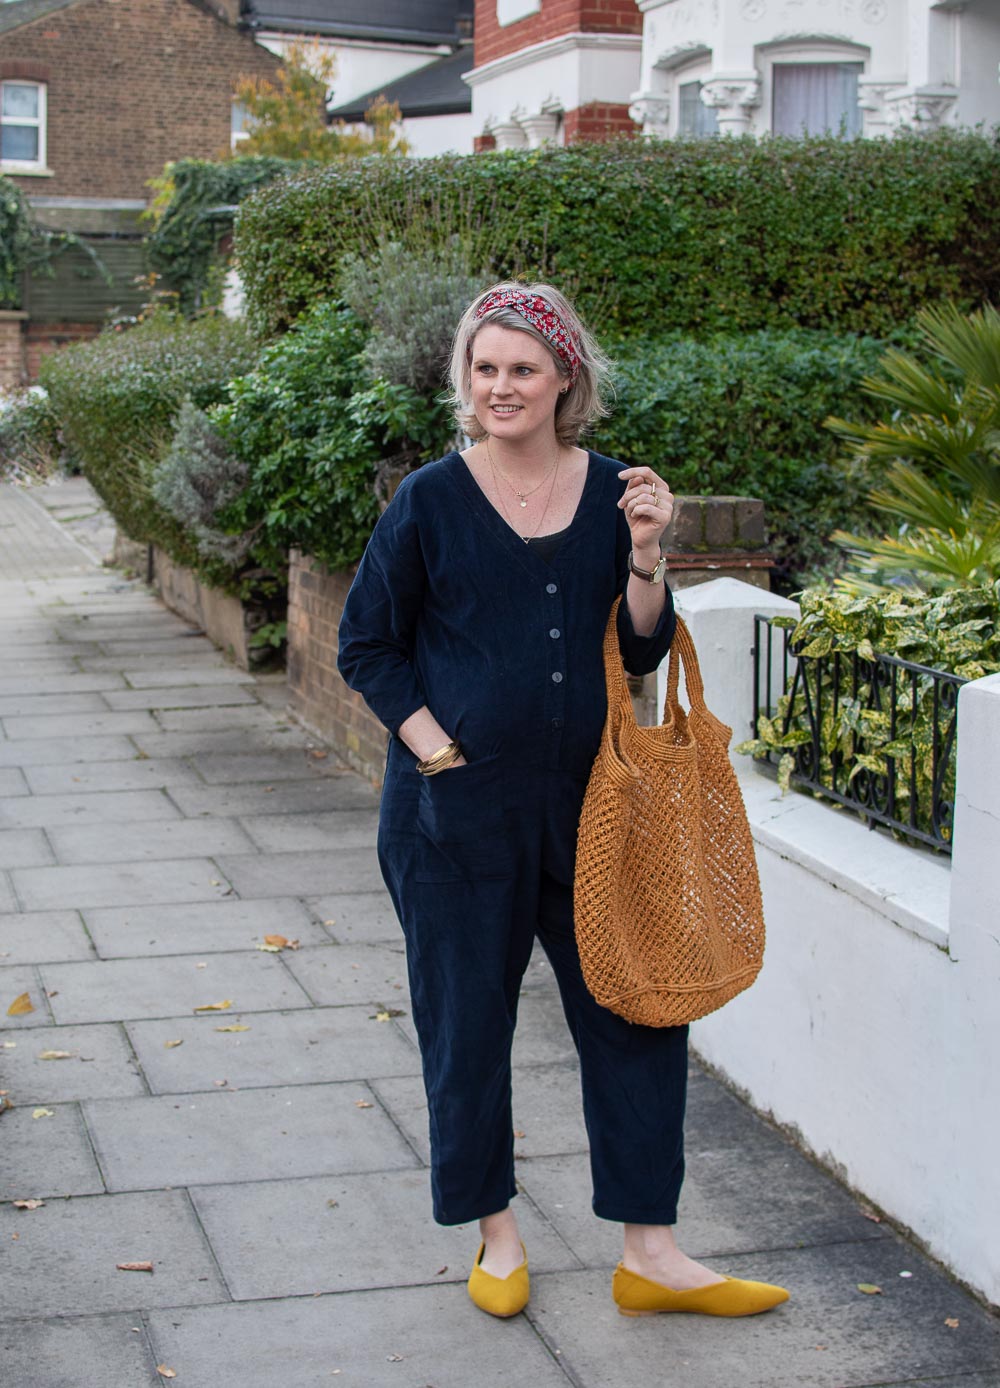 Karen Maurice of n4mummy wearing ethical maternity clothes from Clary & Peg. A organic blue boiler suit with a floral headband and yellow shoes